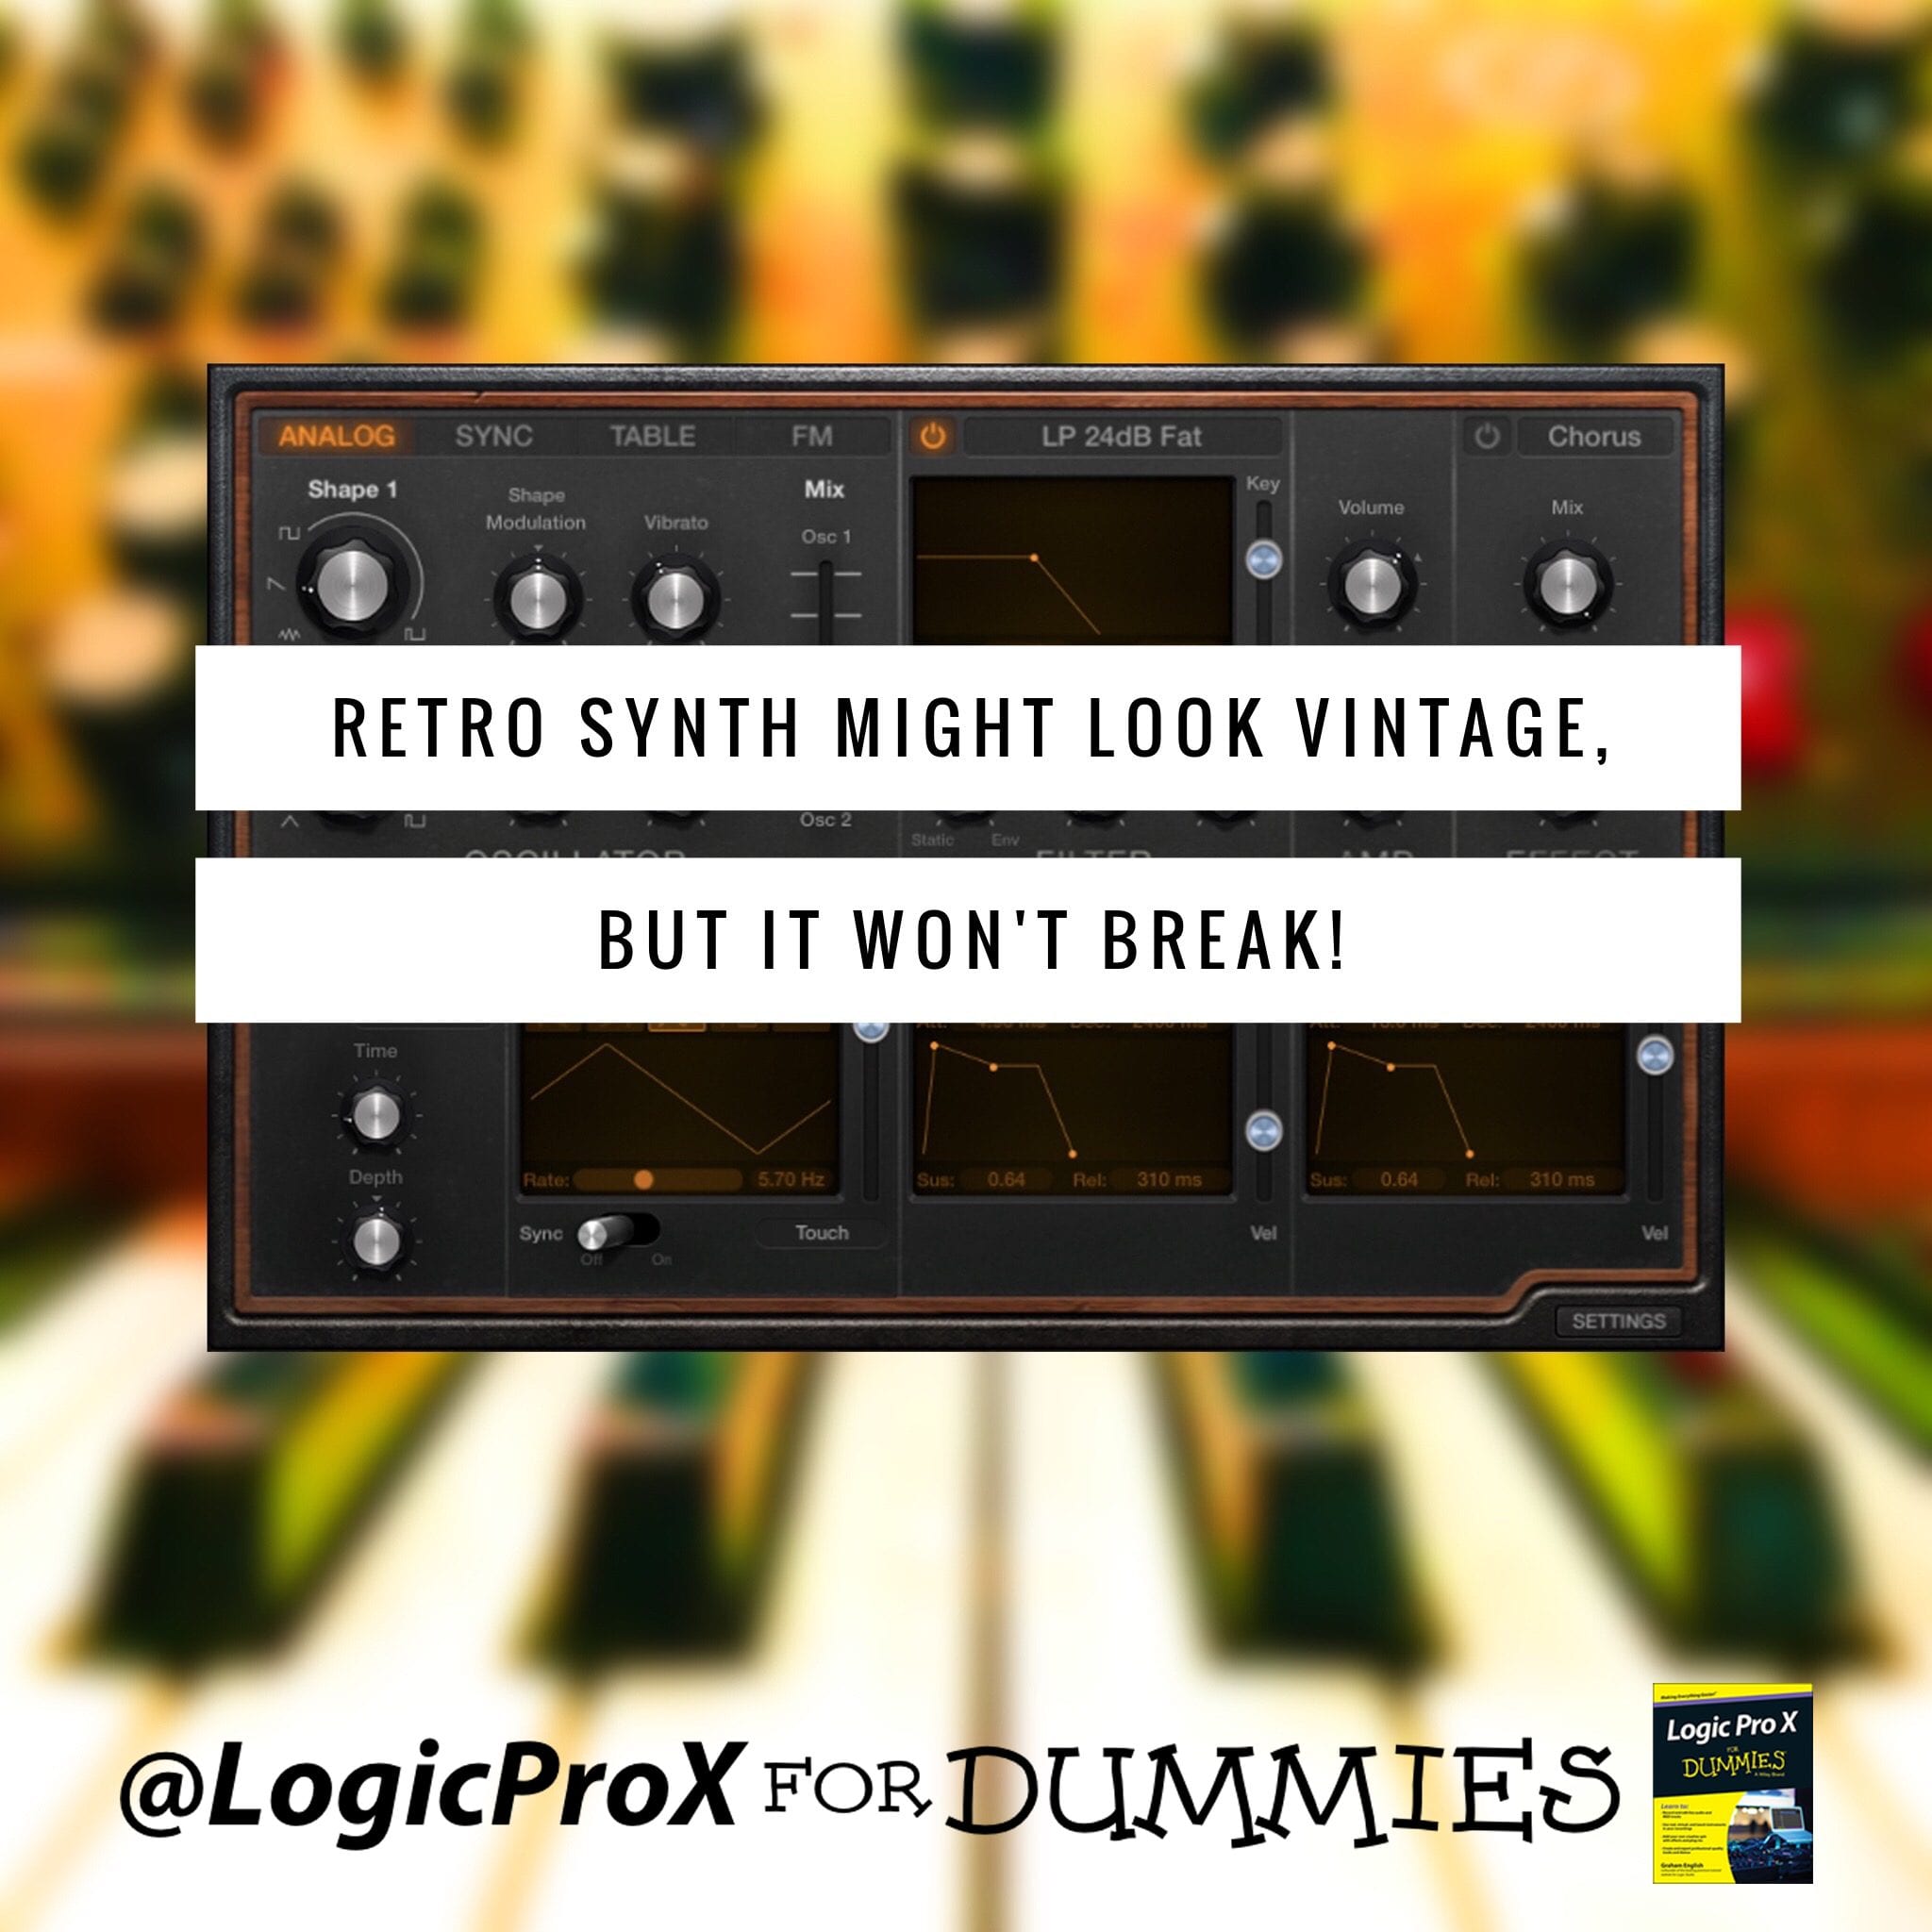 Retro Synth Might Look Vintage, But It Won't Break!